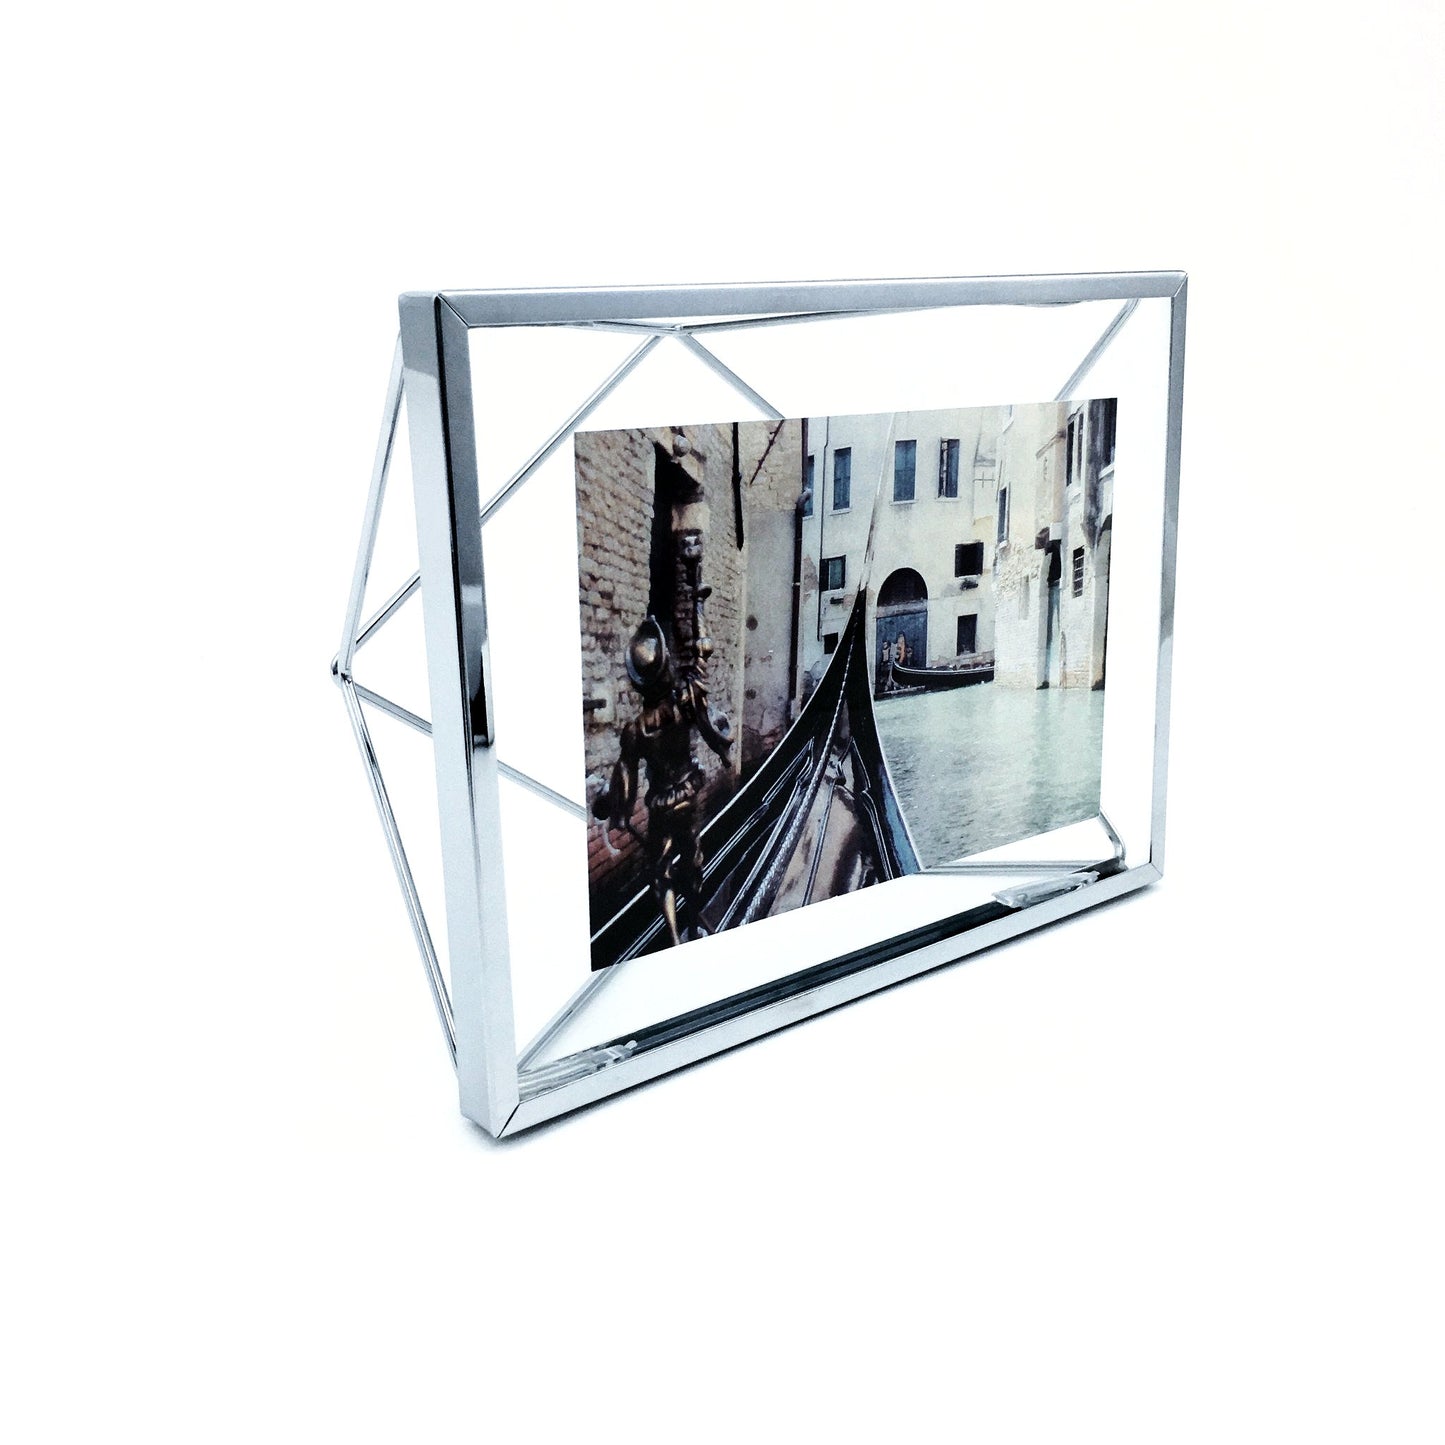 "Prisma" Picture Frames in Chrome by Umbra - by Umbra - K. A. Artist Shop